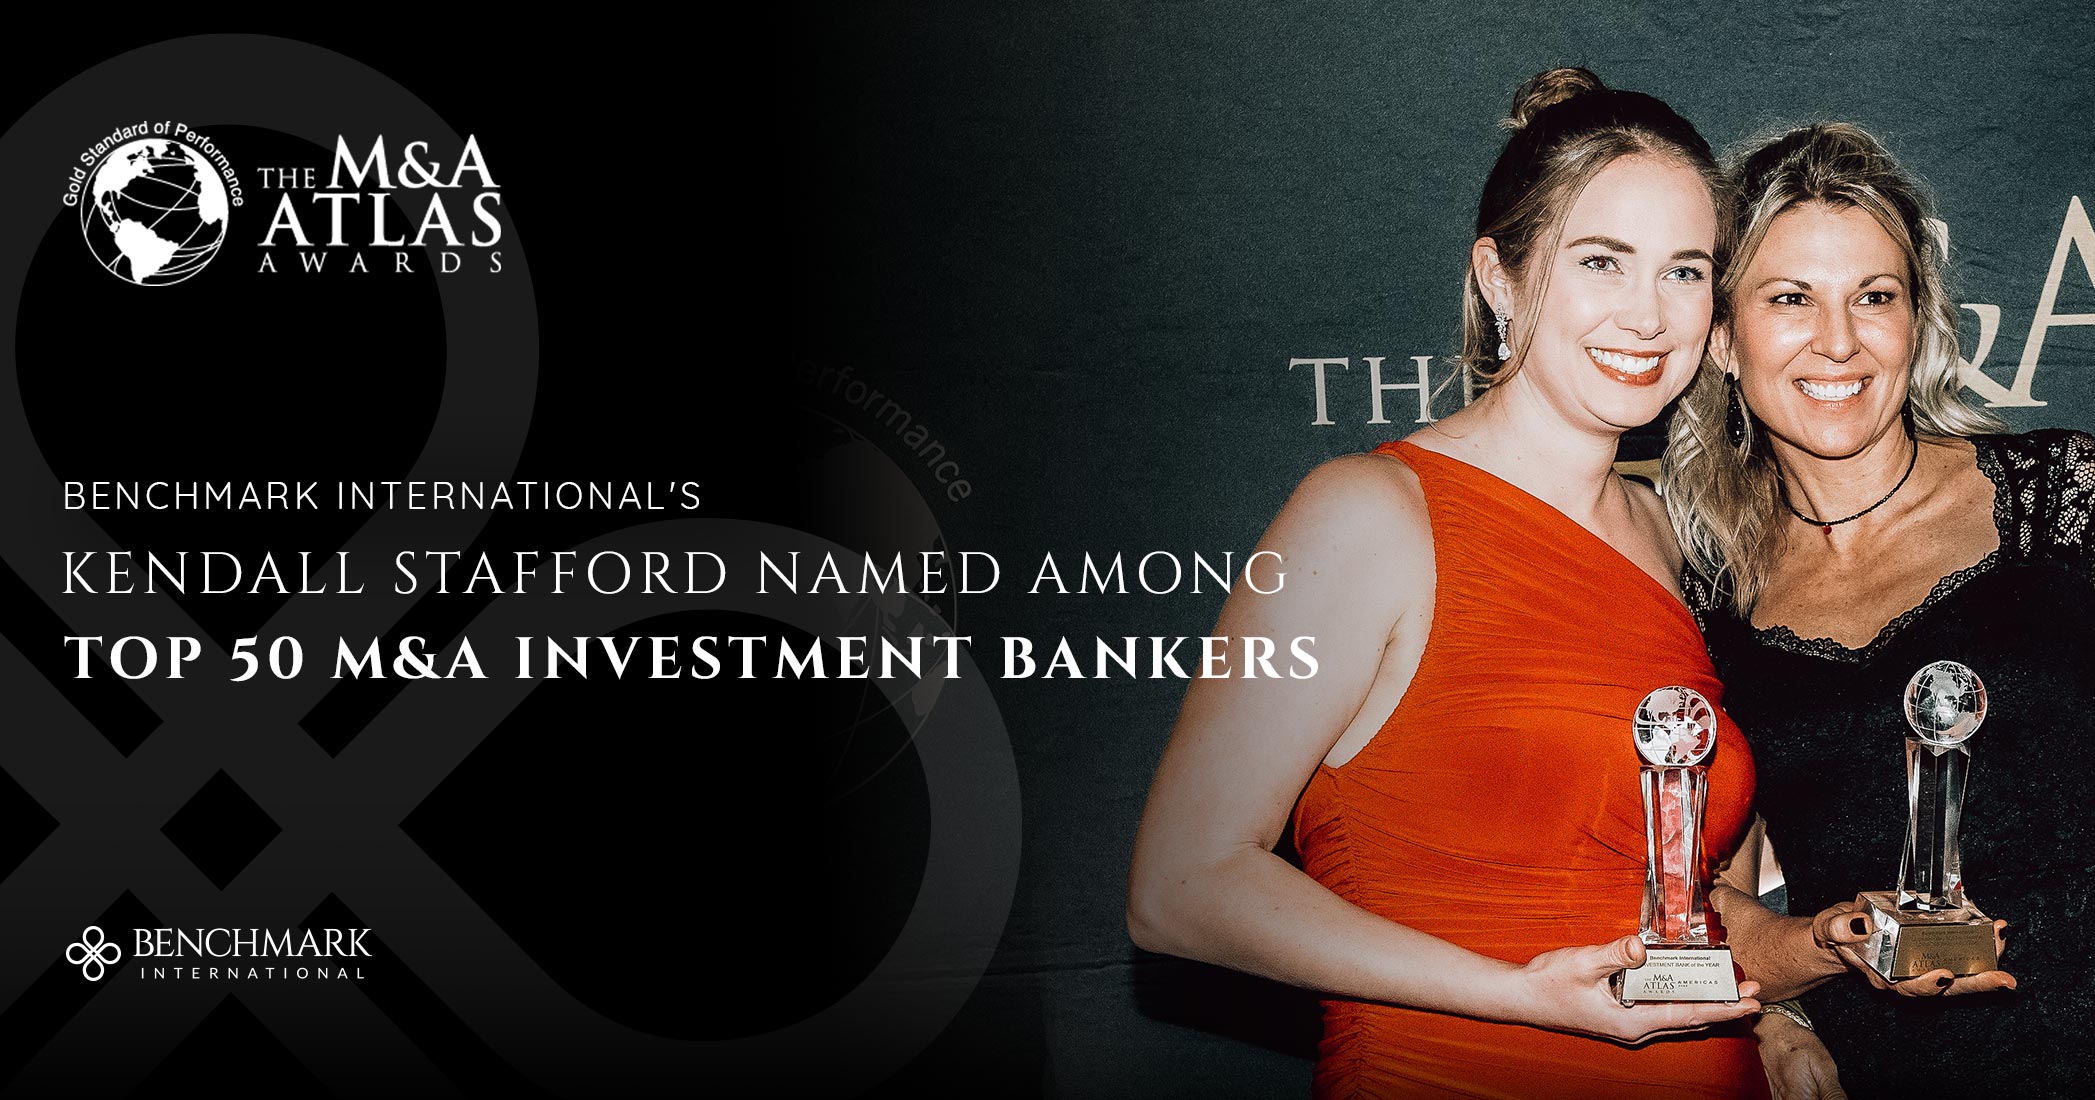 Benchmark International's Kendall Stafford Named Among Top 50 M&A Investment Bankers